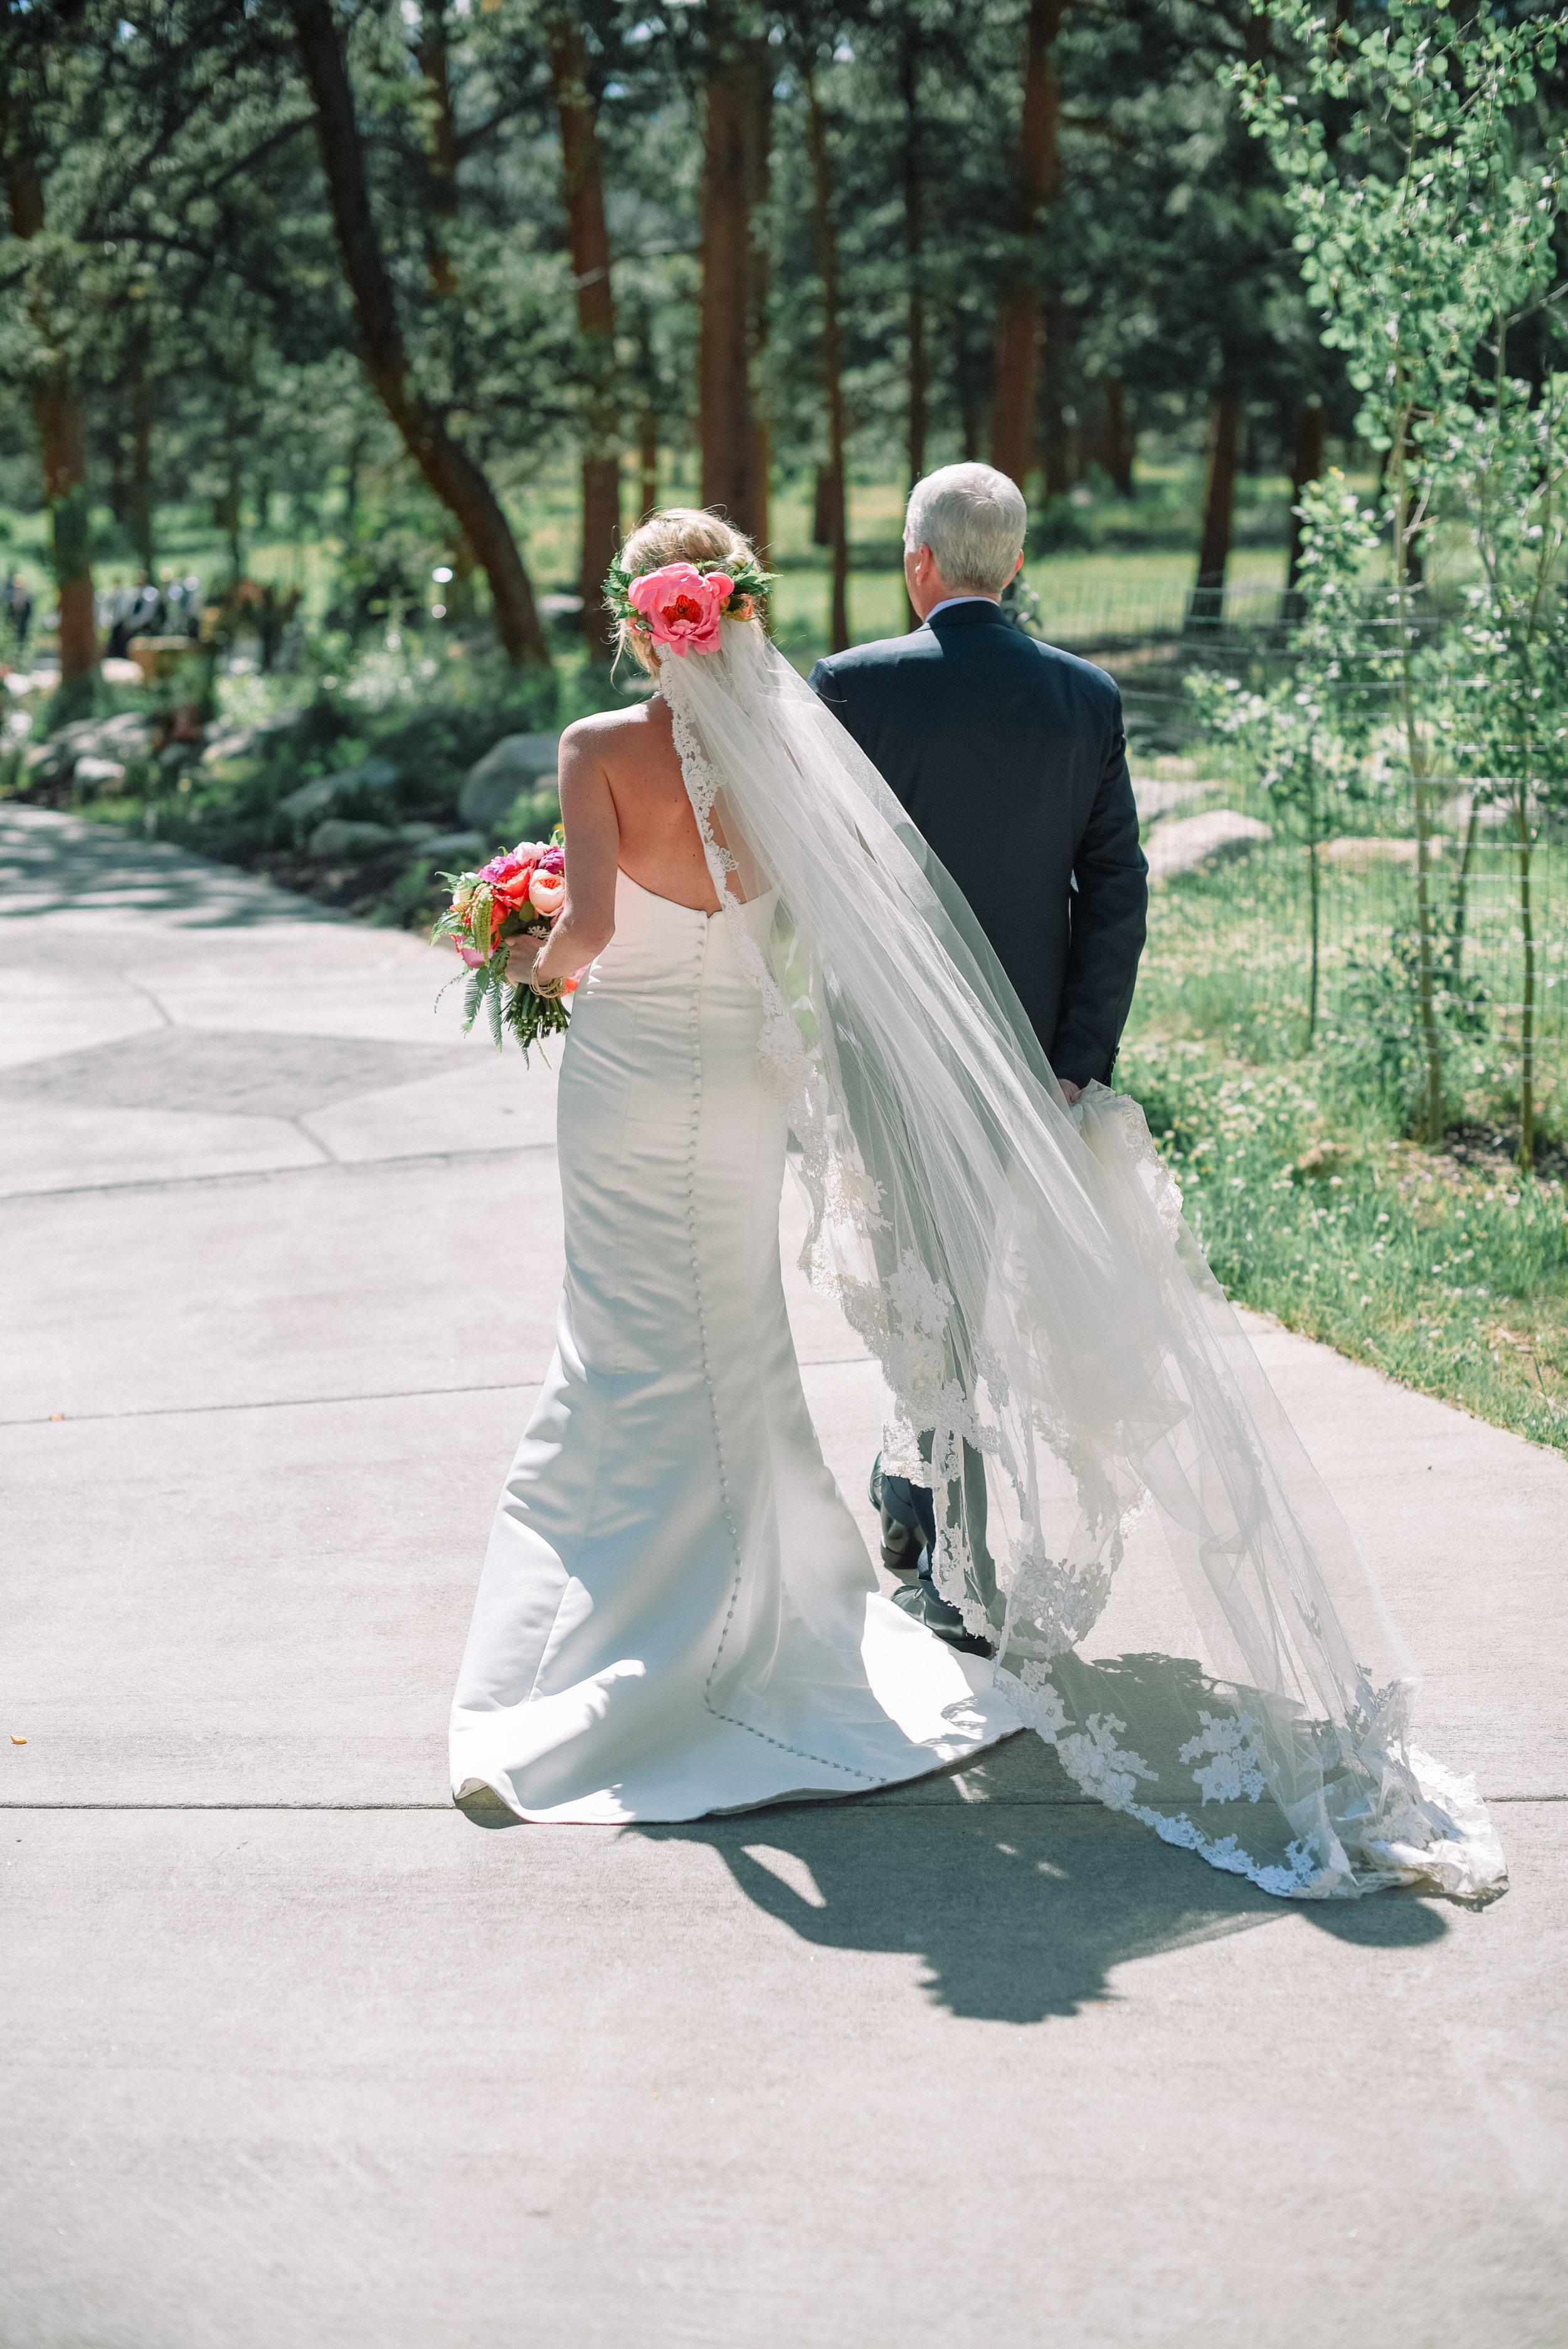  Kellie + Rob | Della Terra Mountain Chateau | wedding gown "Sarah" by Robert Bullock Bride and belt "Francine" by "Sassi Holford" | Laura Murray Photography 